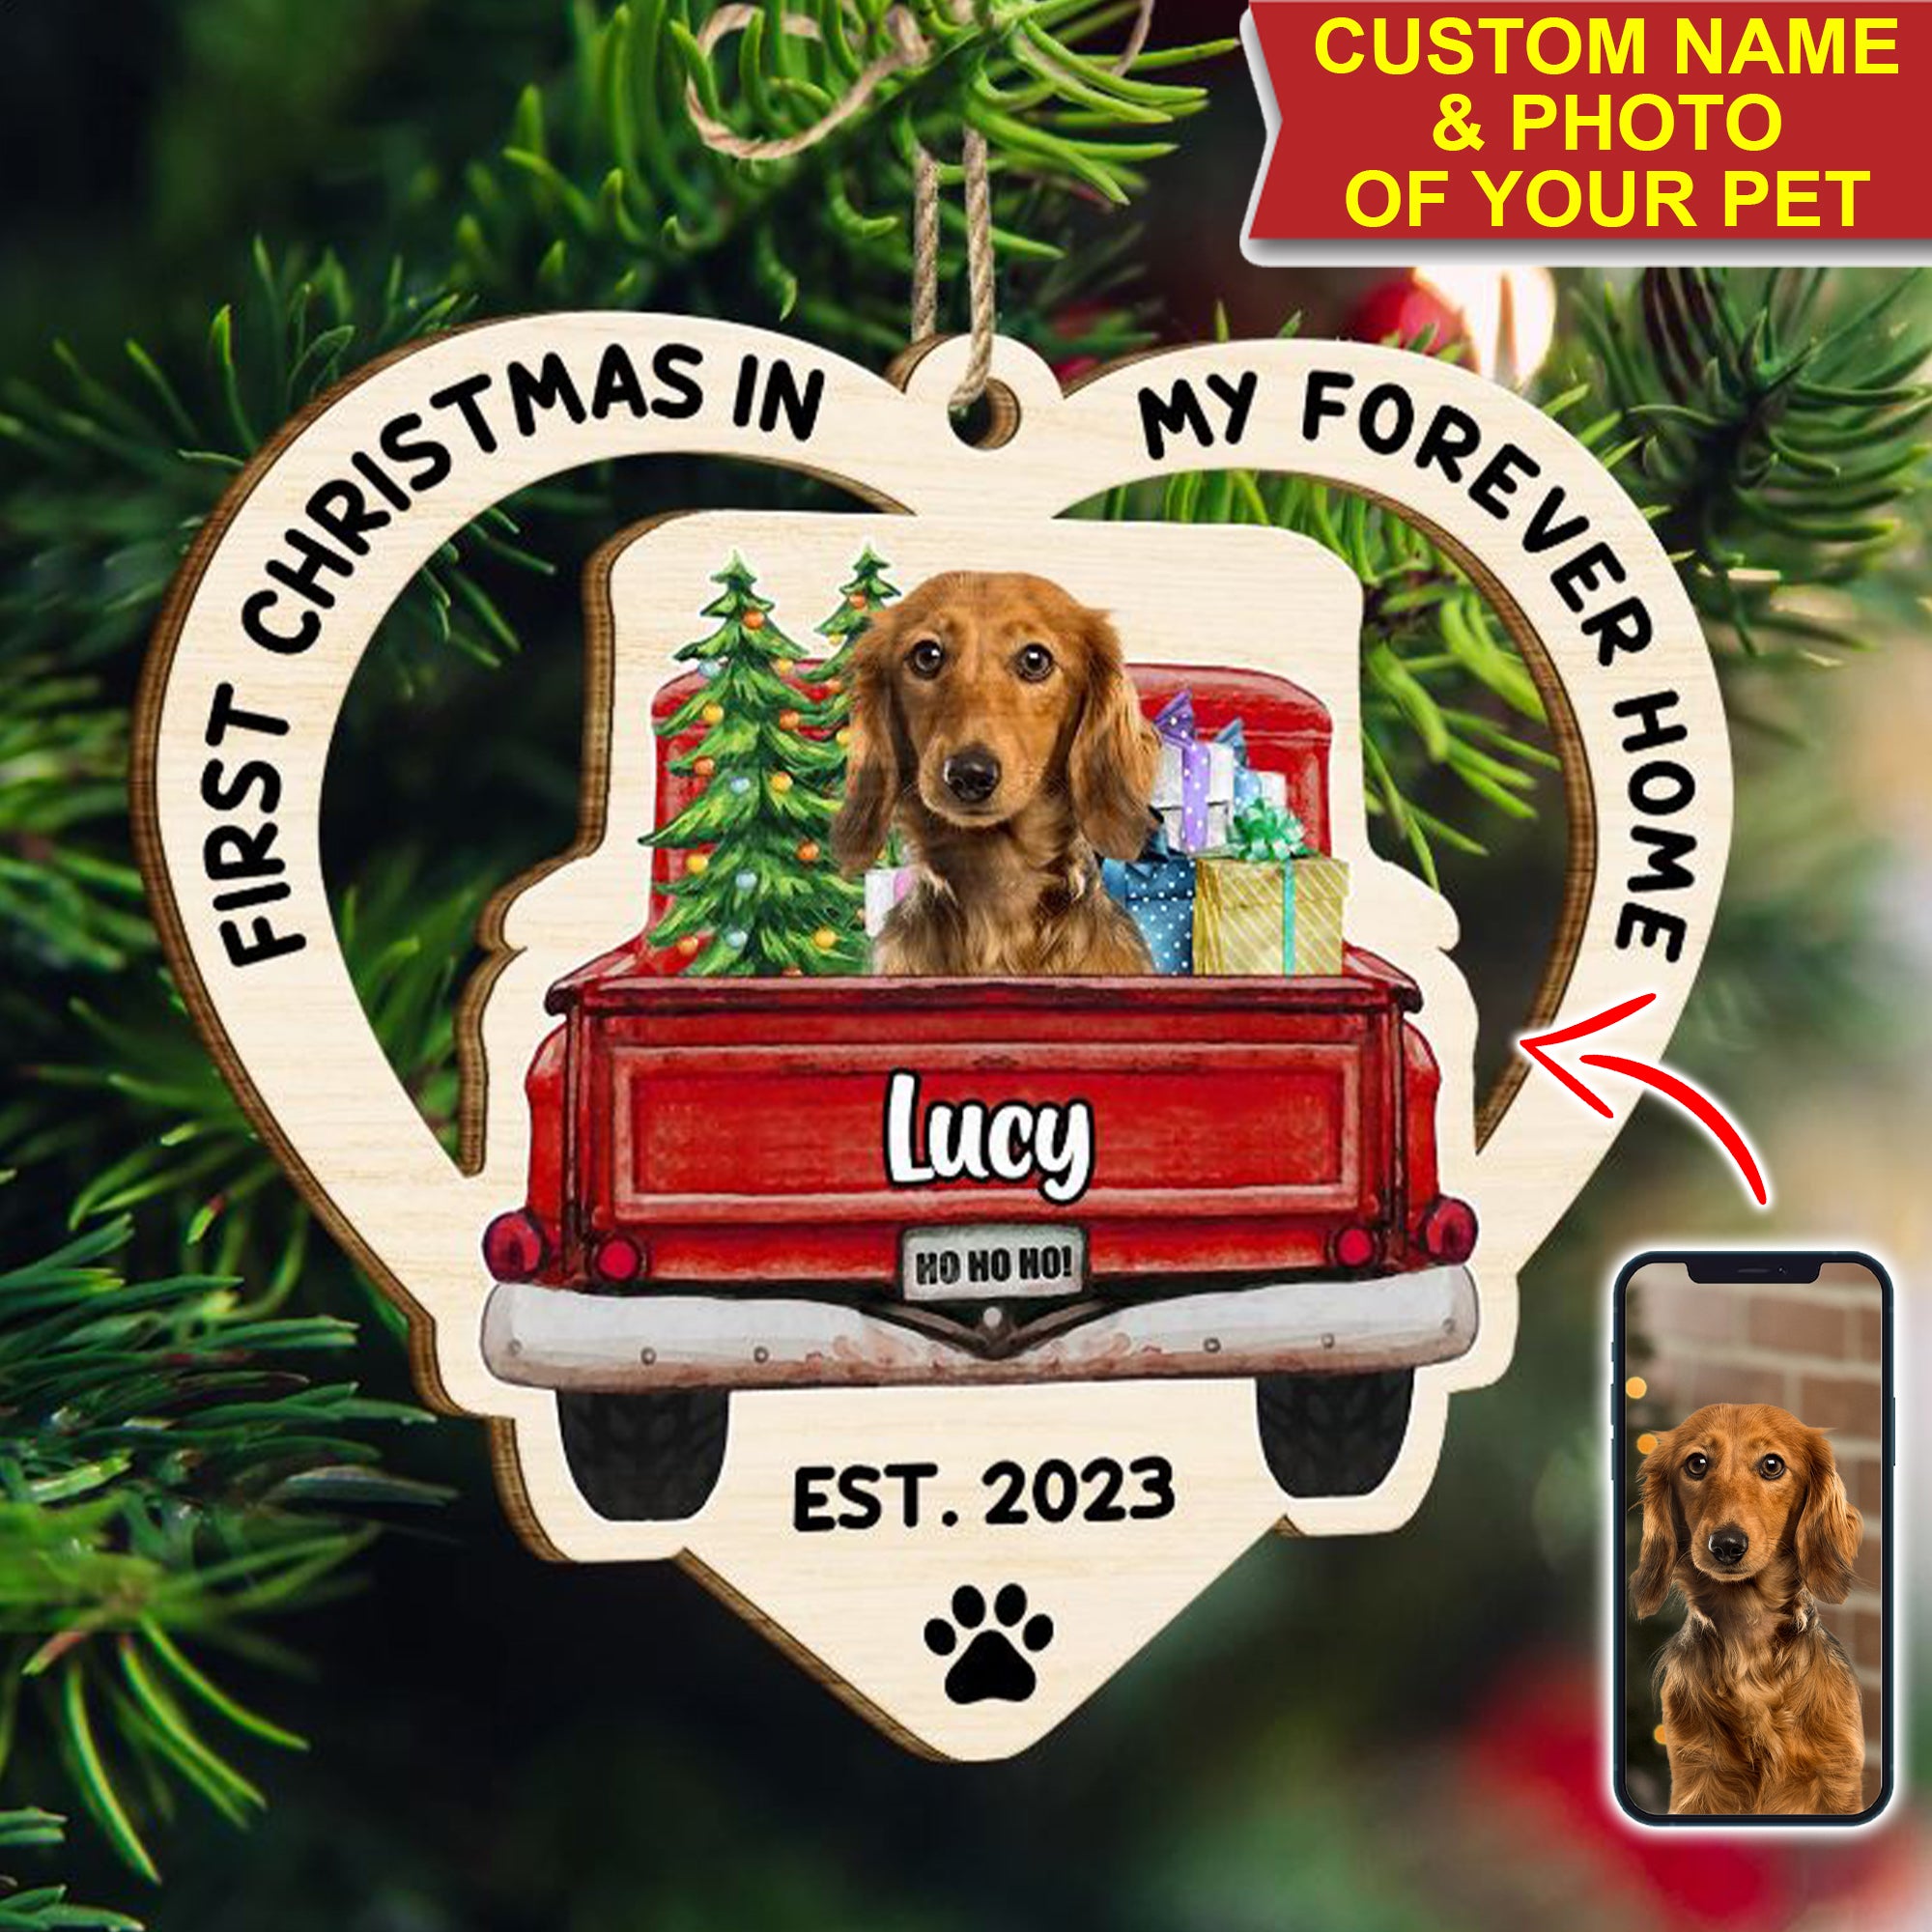 First Christmas In My Forever Home, Custom Pet Photo And Name - Personalized Custom Shaped Wooden Ornament - Gift For Pet Lover, Christmas Gift